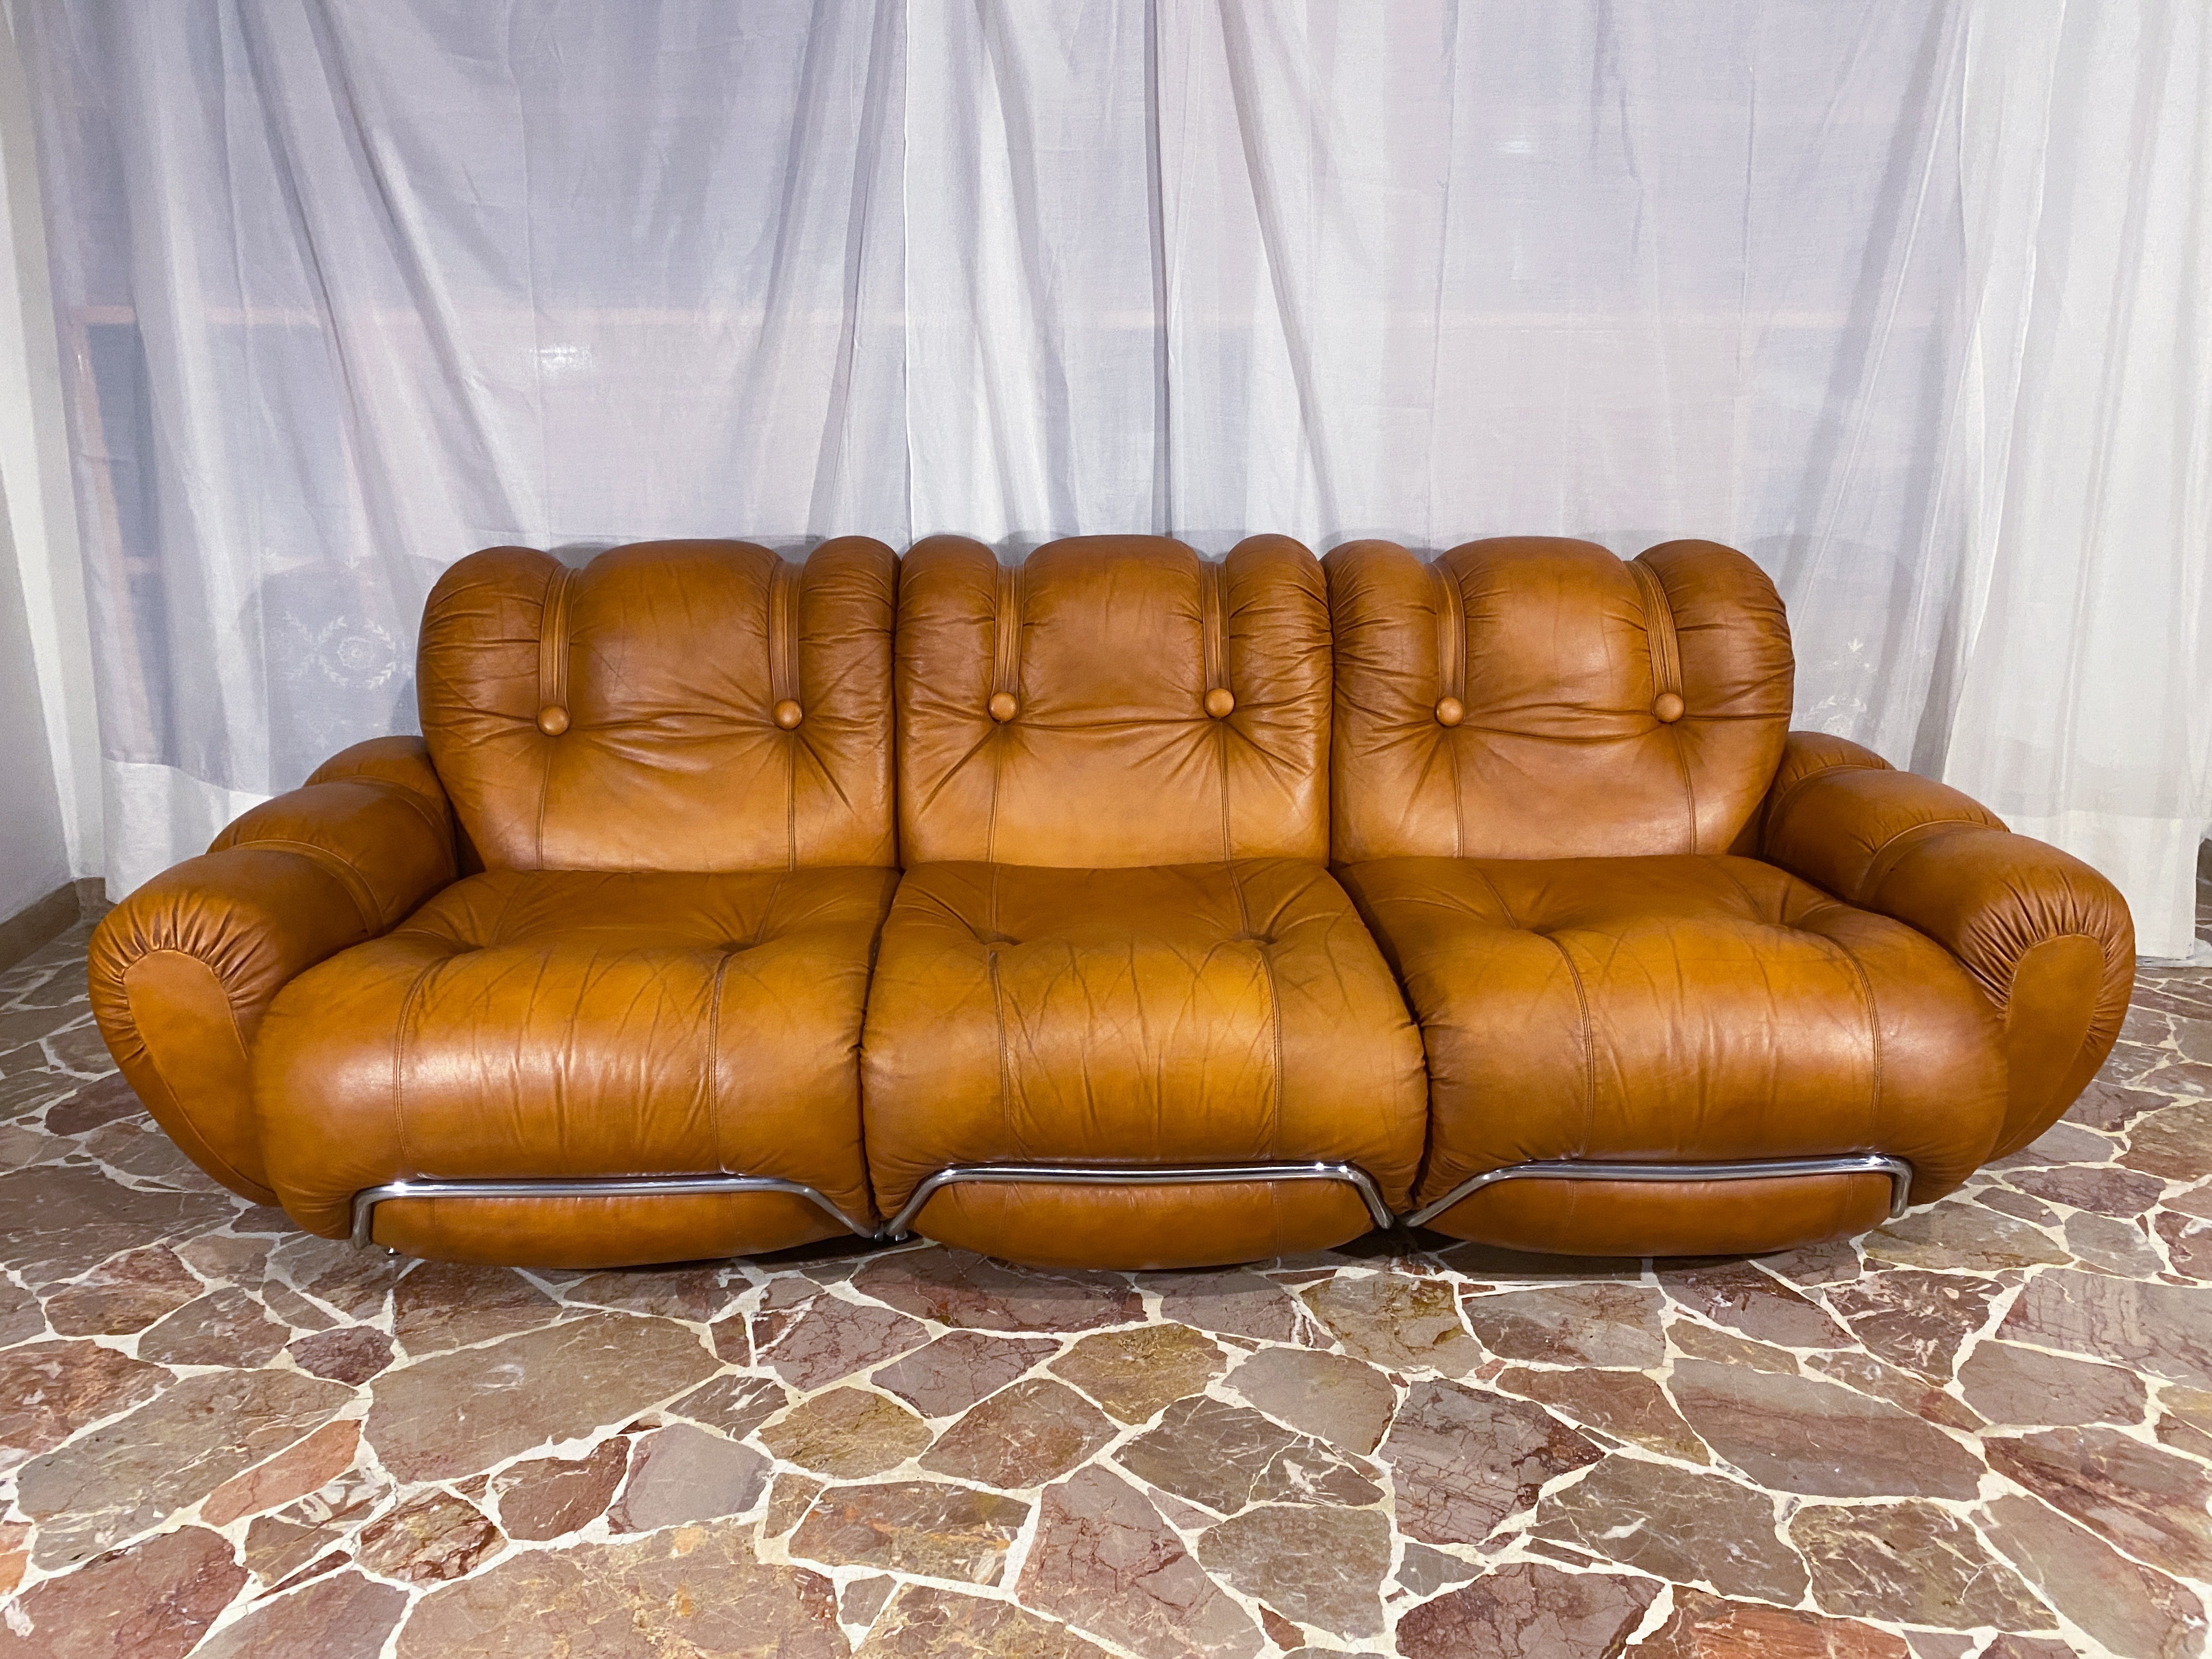 Splendid three-seater sofa made in Italy in the 70s. The seat is very comfortable and supportive. The pads are still original and in very good condition. Original natural leather upholstery in very good condition from the period,a skilled craftsman